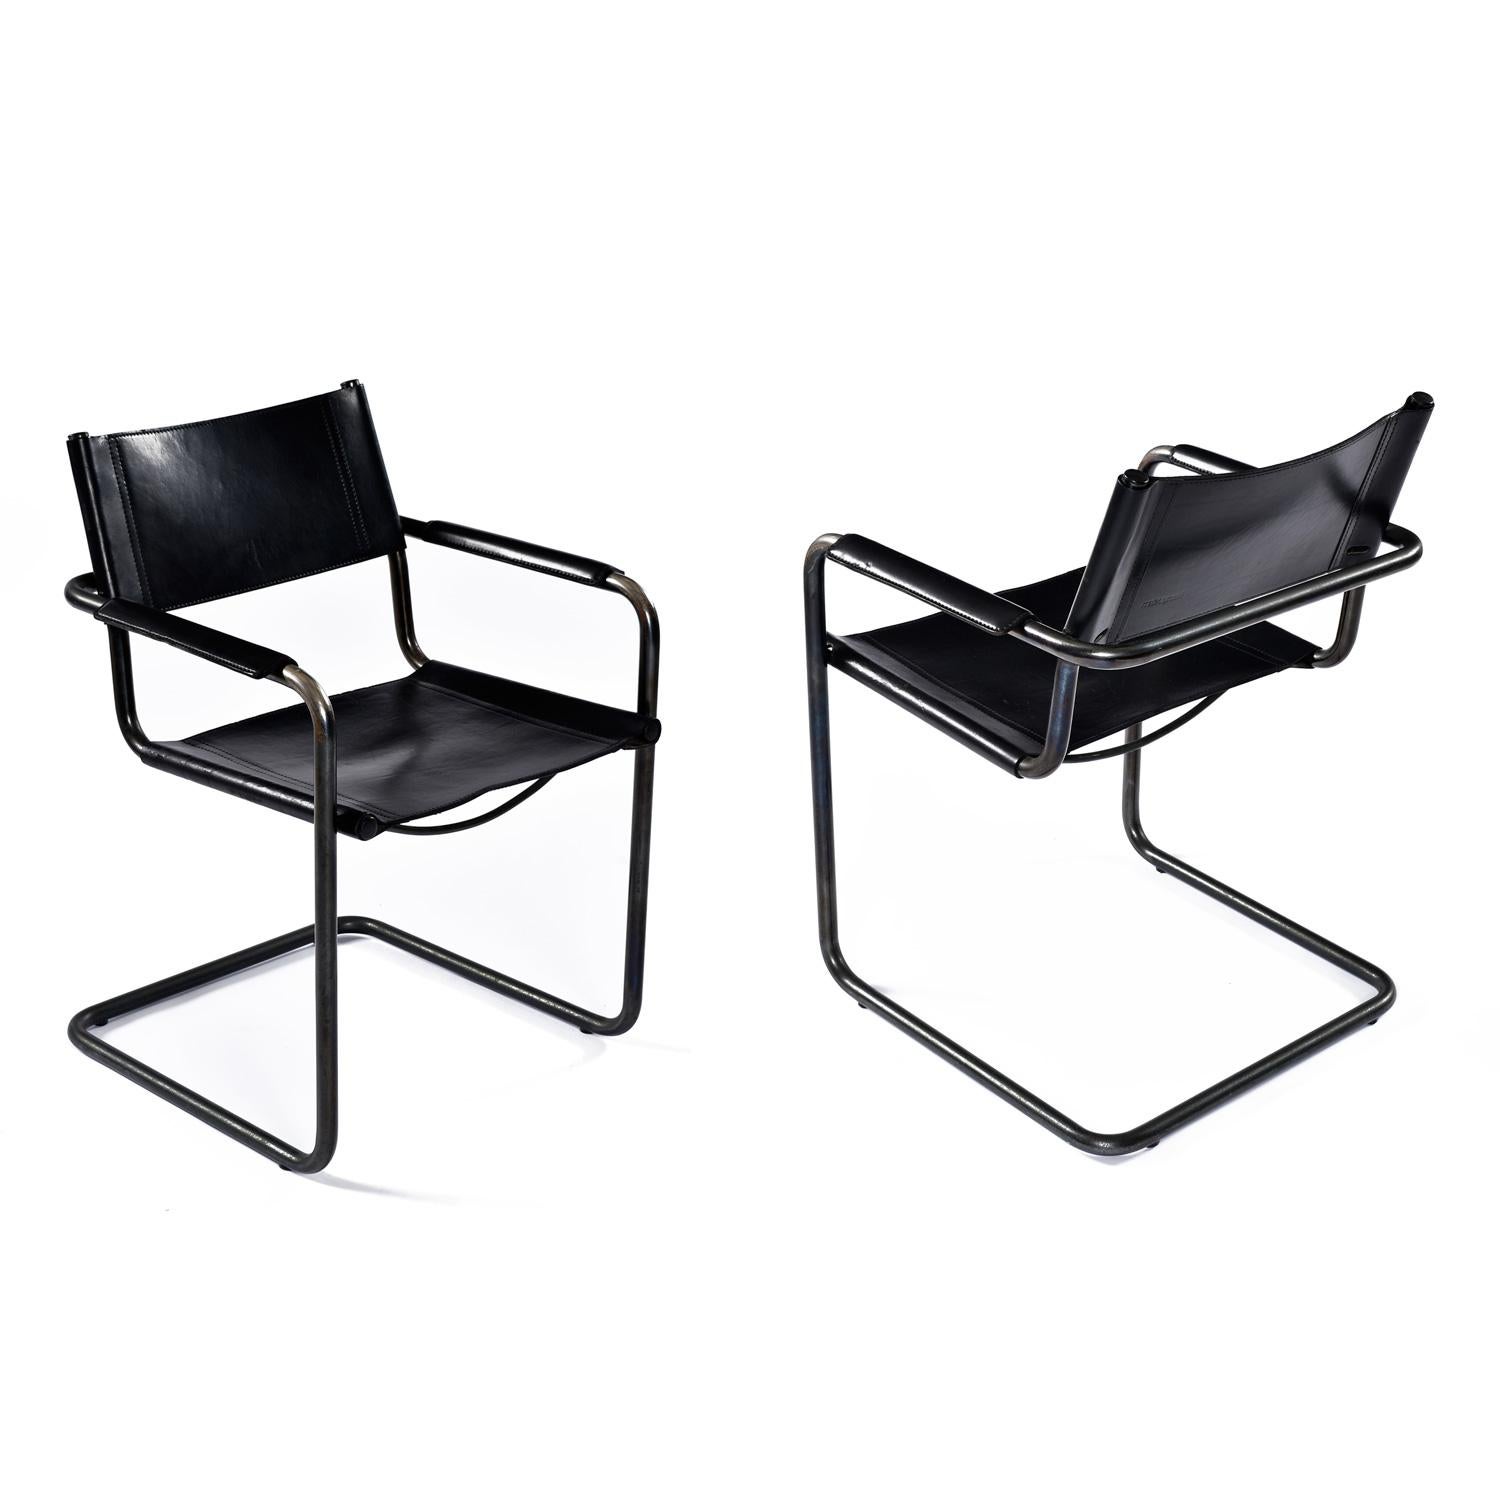 Mid-Century Modern Matteo Grassi Cantilever MG5 Black Leather Chairs by Centro Studi For Sale